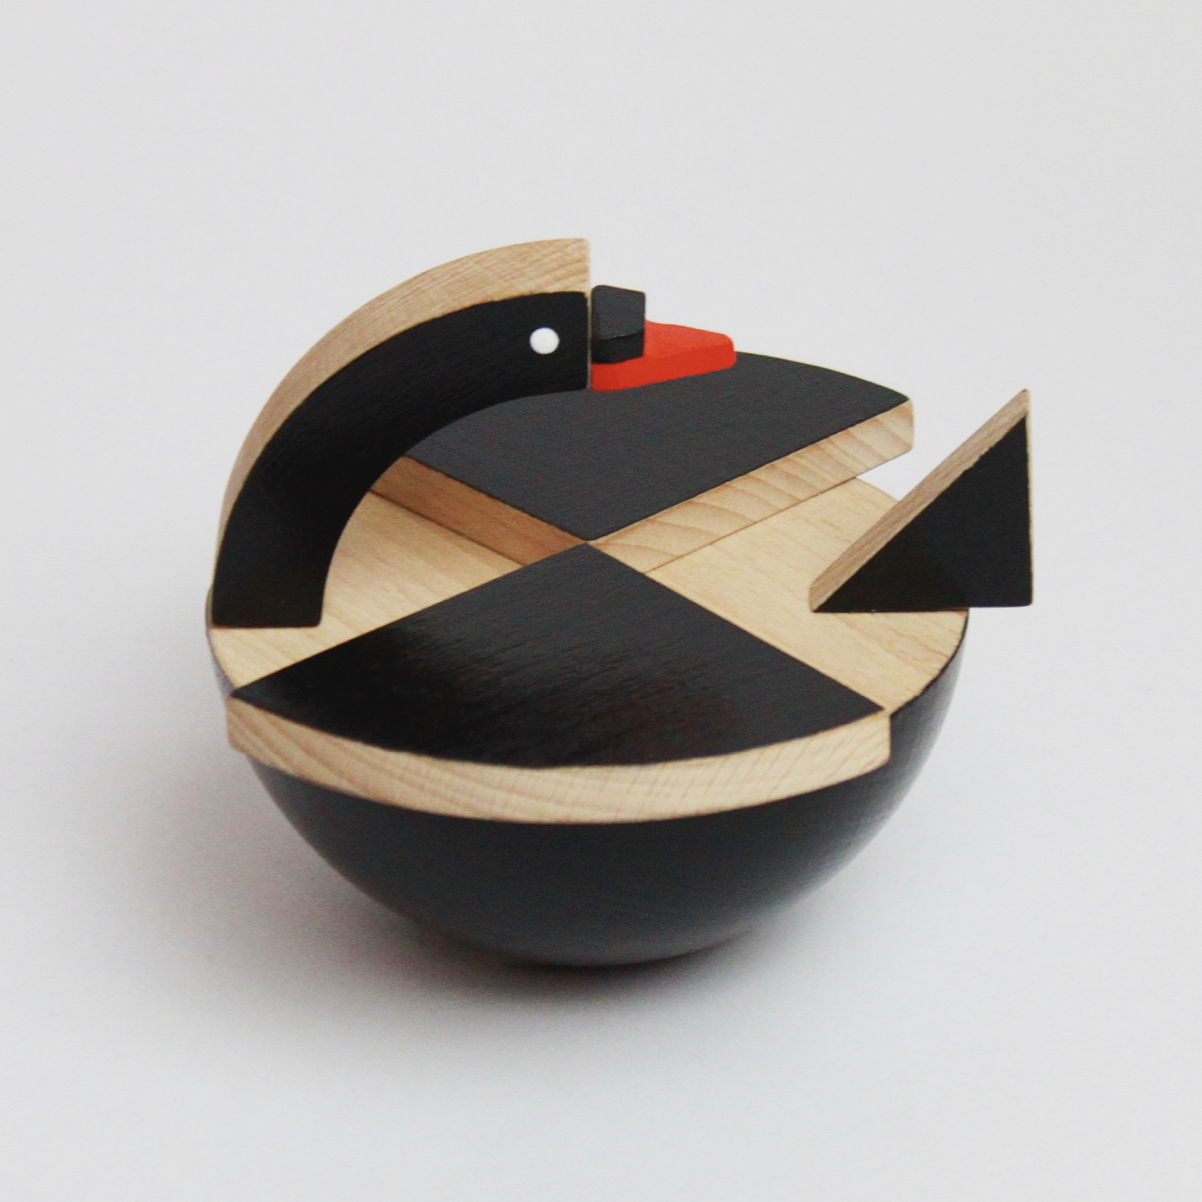 Bula Movable Wooden Toy in Black